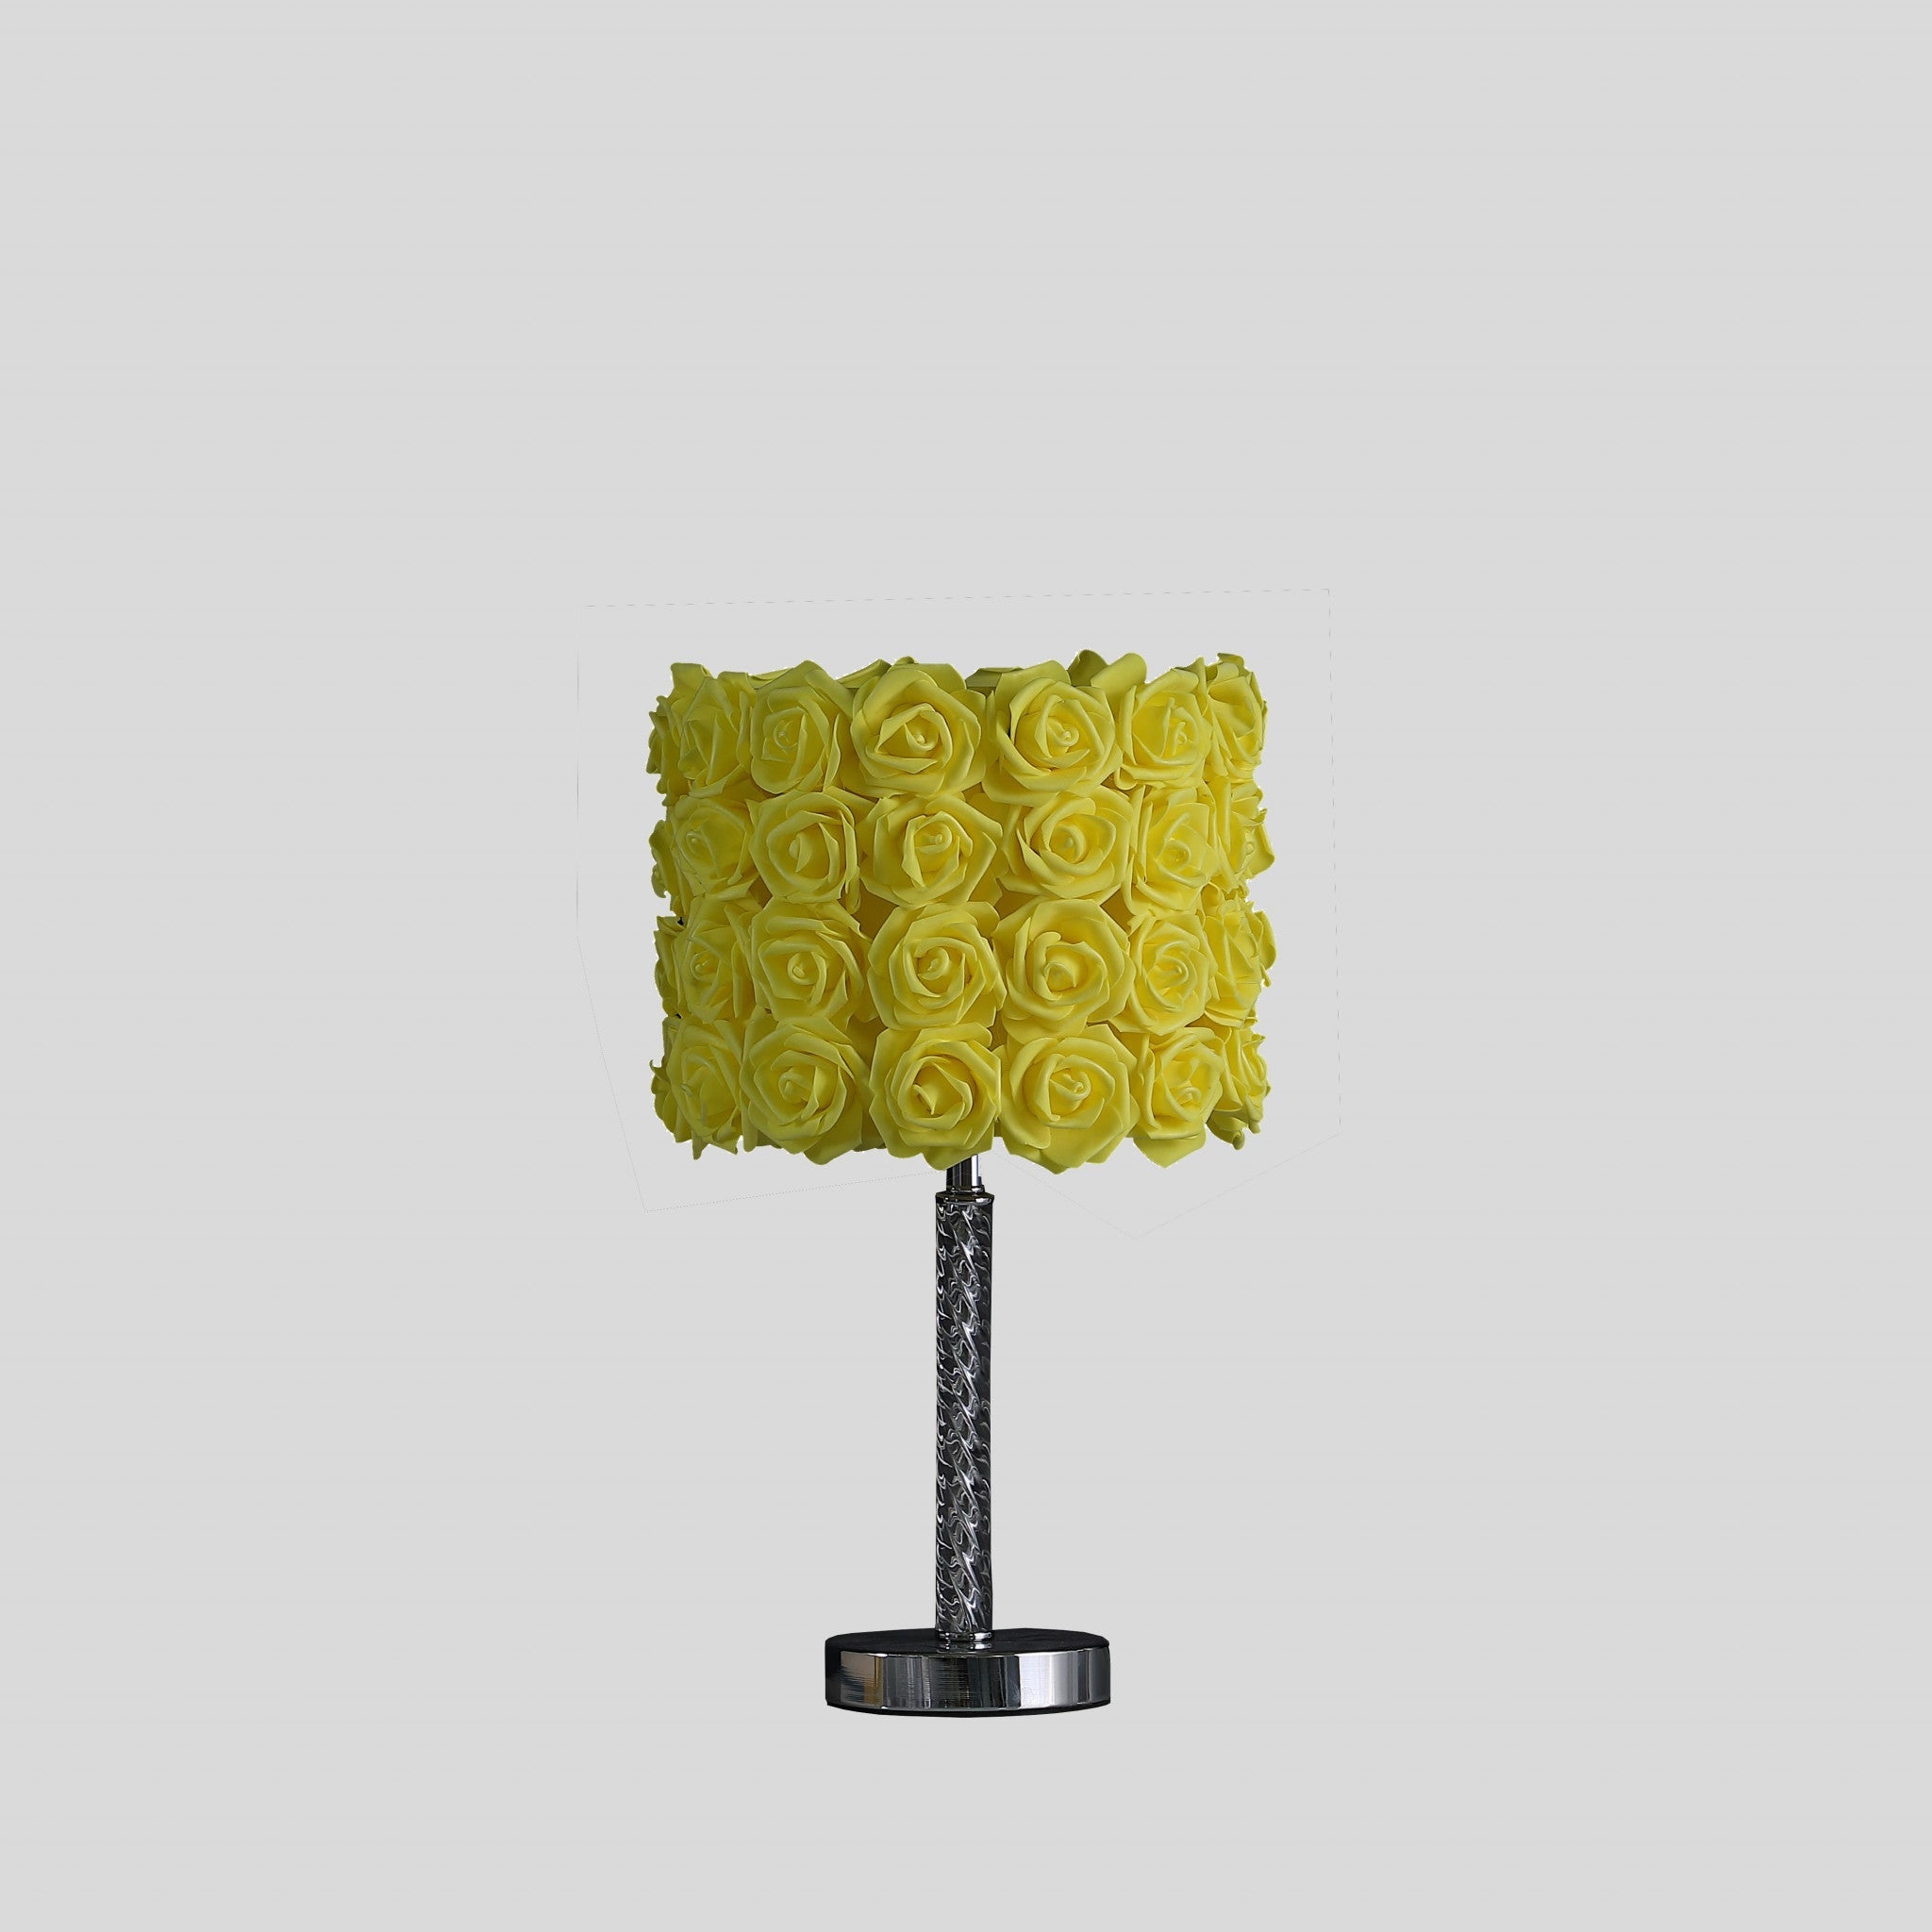 18" Silver Bedside Table Lamp With Yellow Flowers Drum Shade - Tuesday Morning-Table Lamps